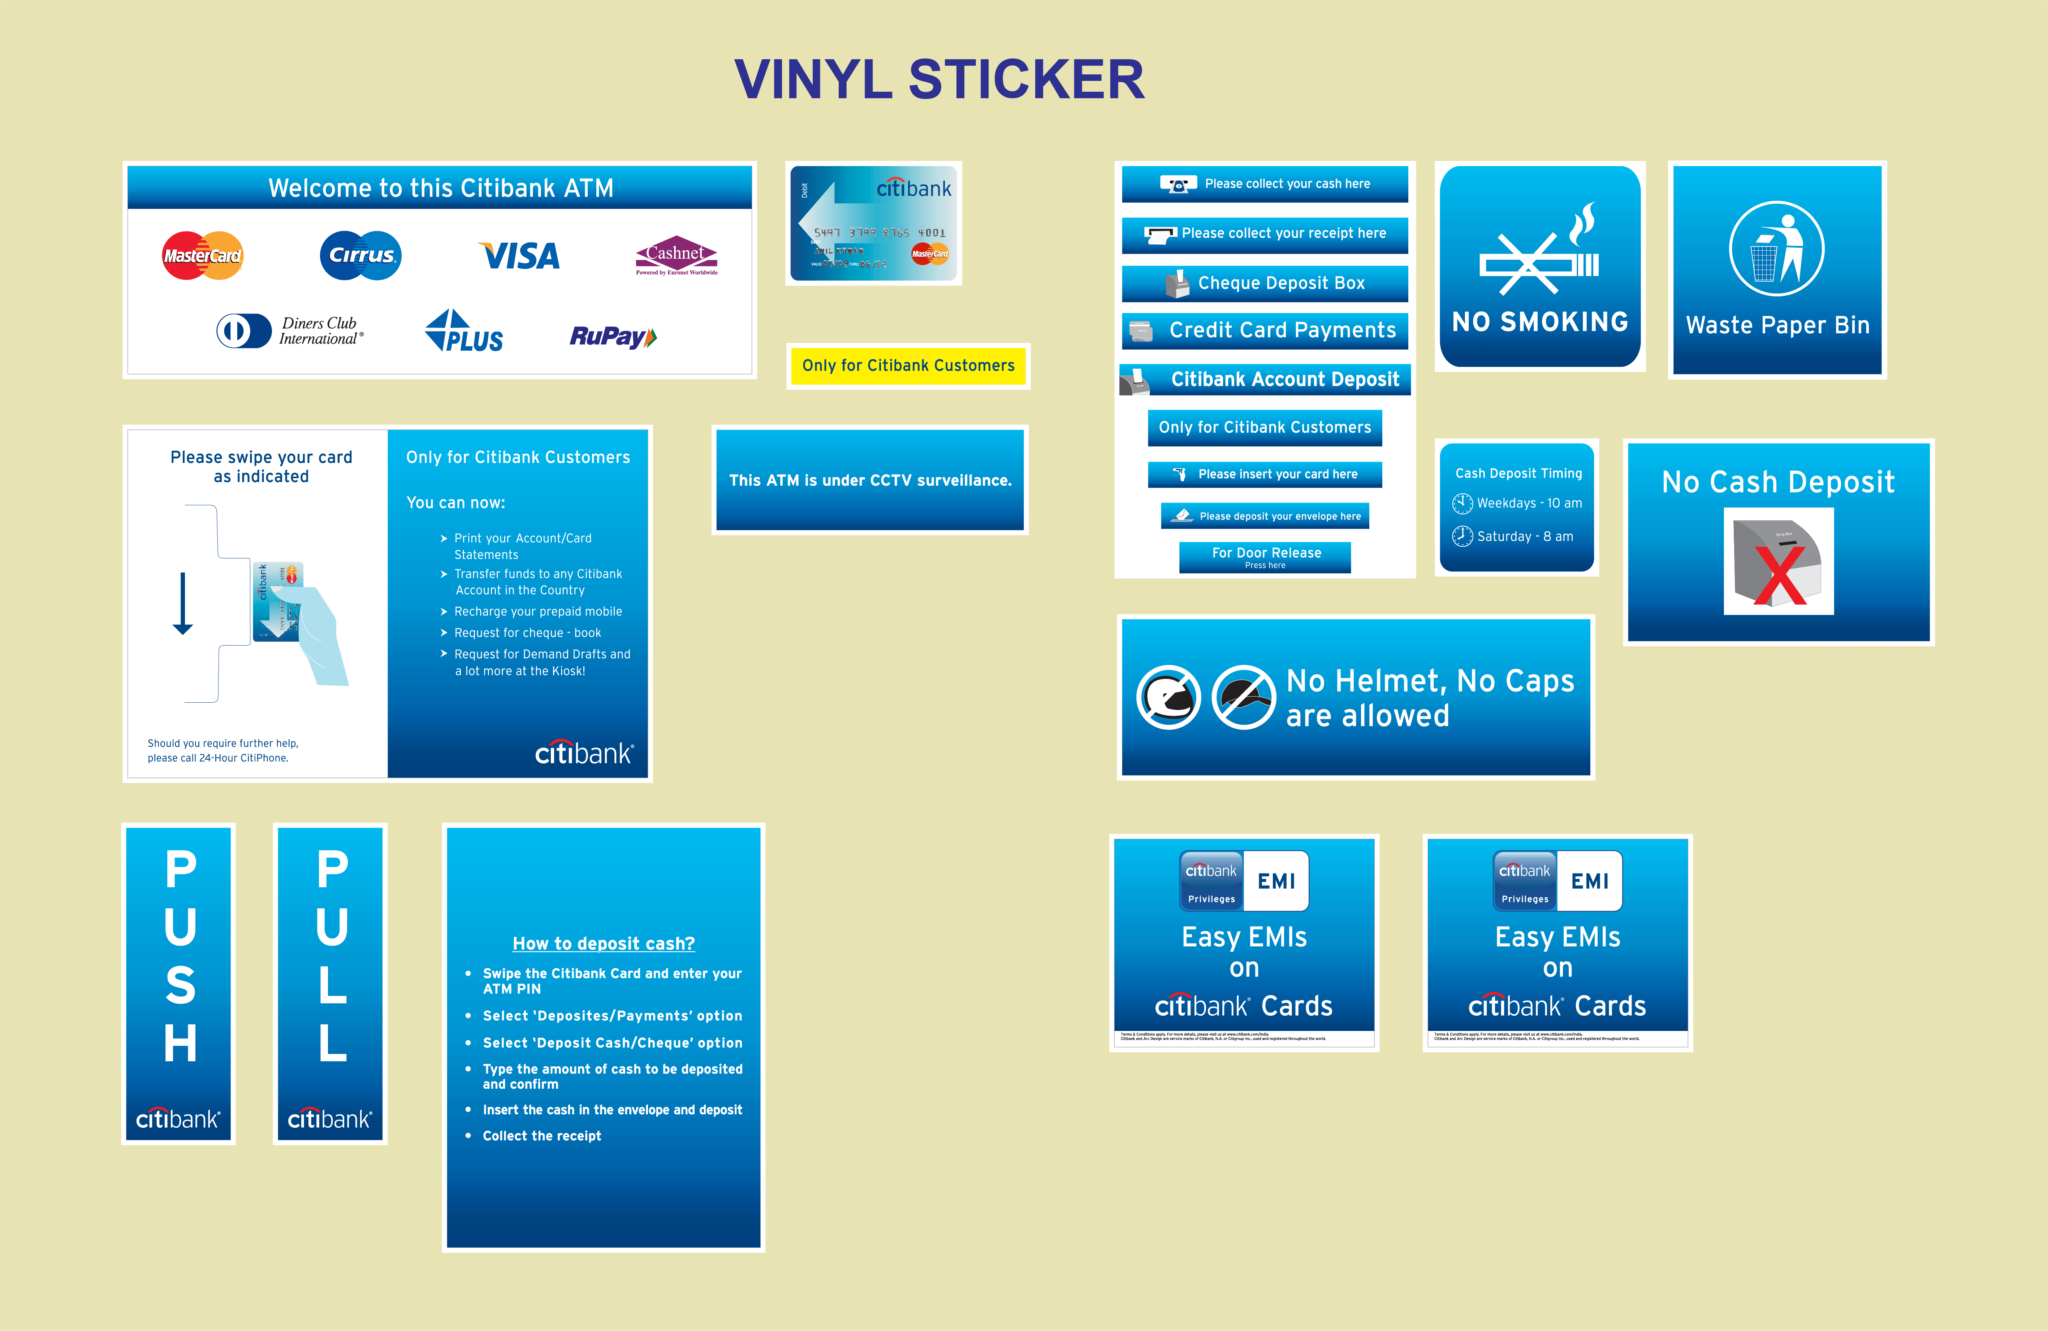 A collection of vinyl sticker printing samples for ATM instructions and notices, featuring card network logos, cash handling directions, and safety reminders.